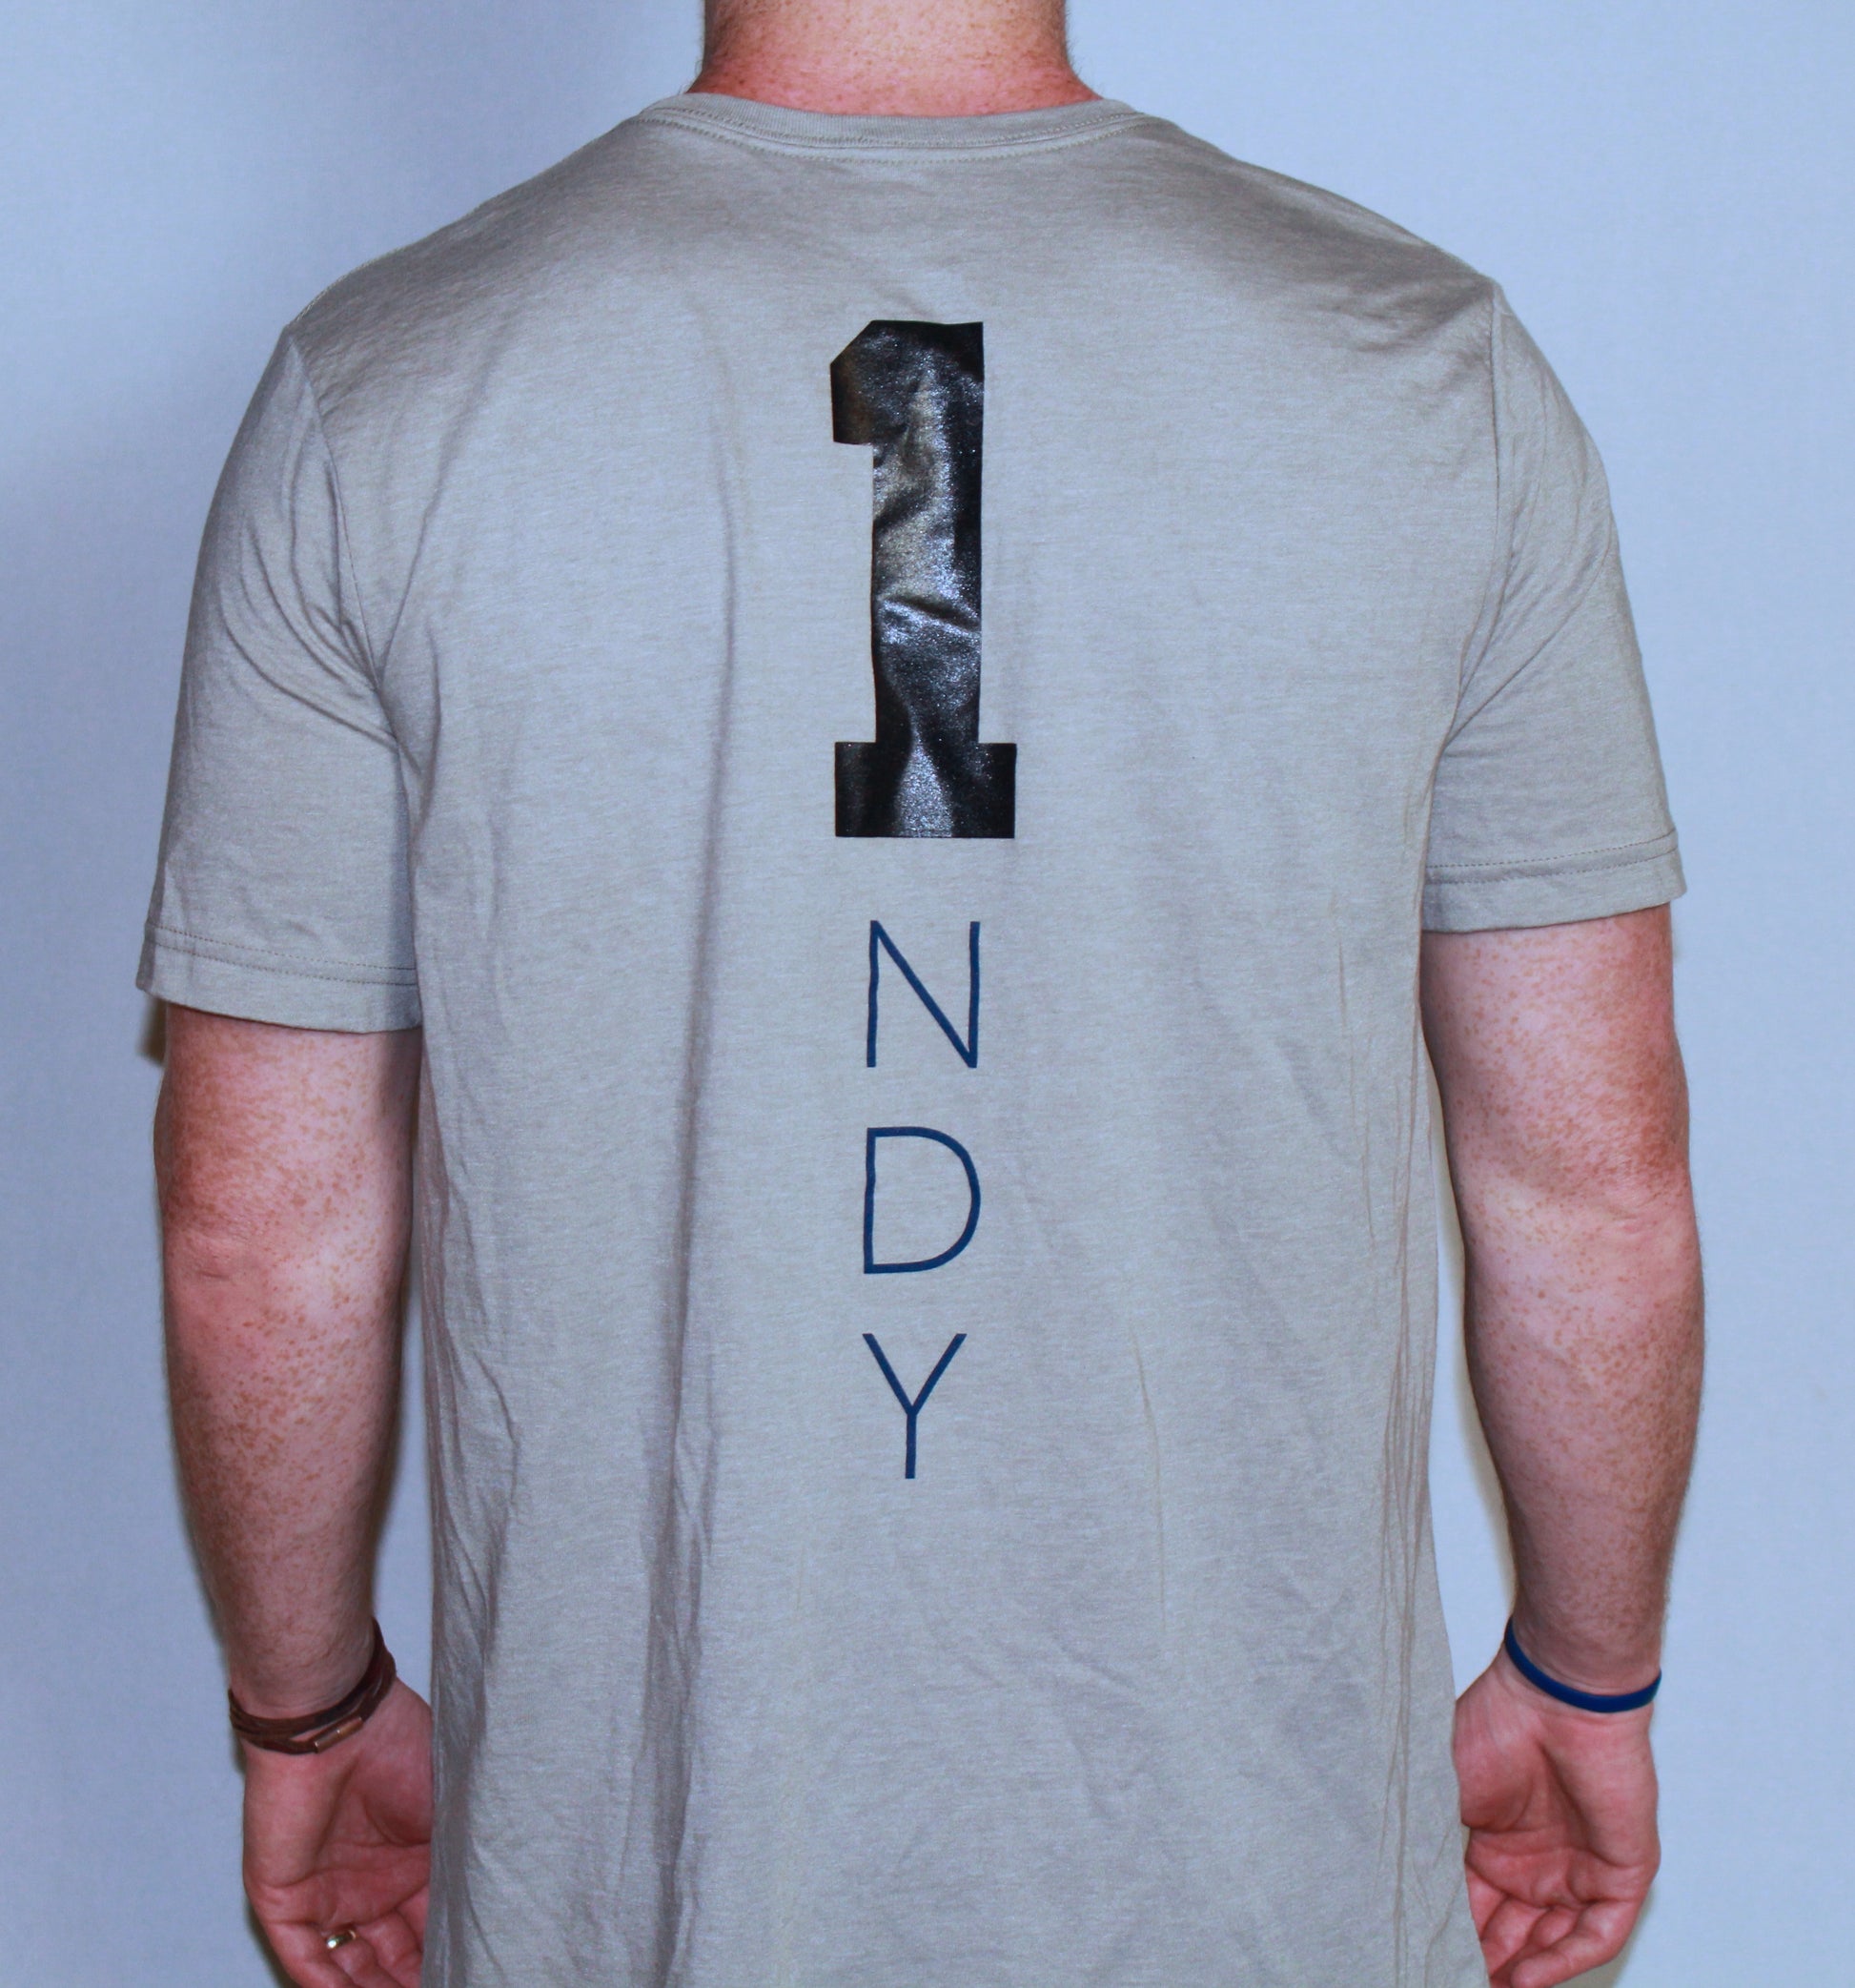 1NDY TEE - Indy Over Everything